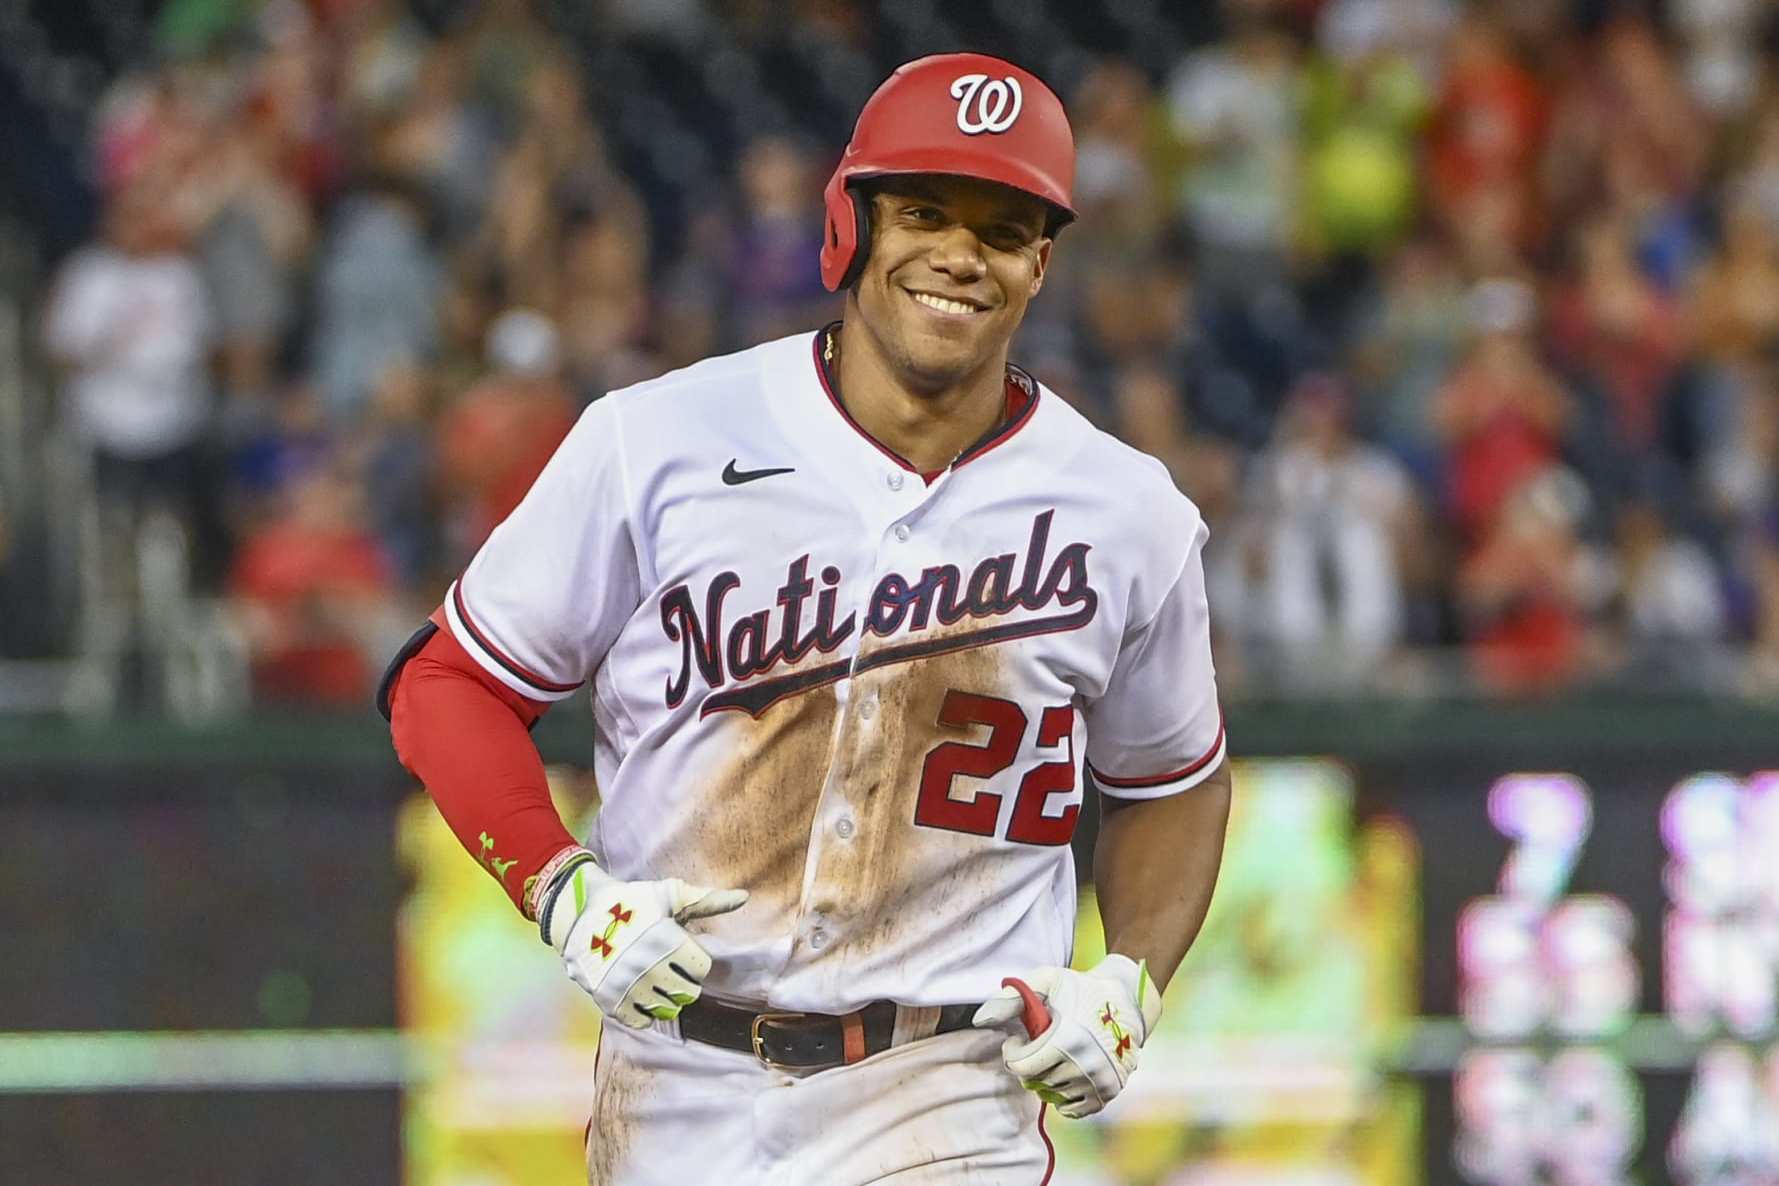 WATCH: Nationals GM Rizzo explains trading Juan Soto, Josh Bell to Padres  for 6 players